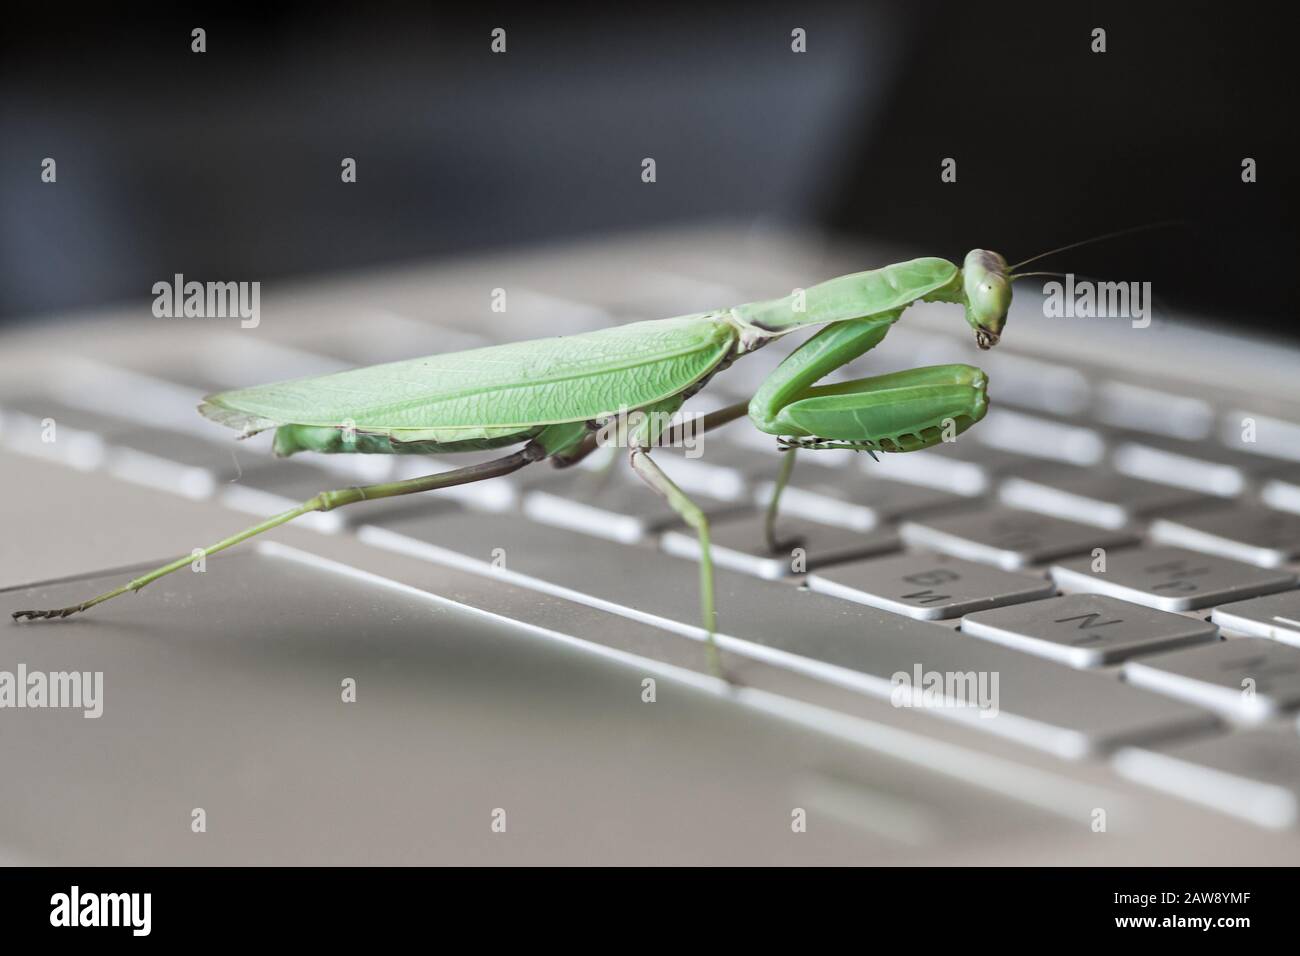 Software bug metaphor. Big green mantis is on a PC keyboard, close-up Stock Photo